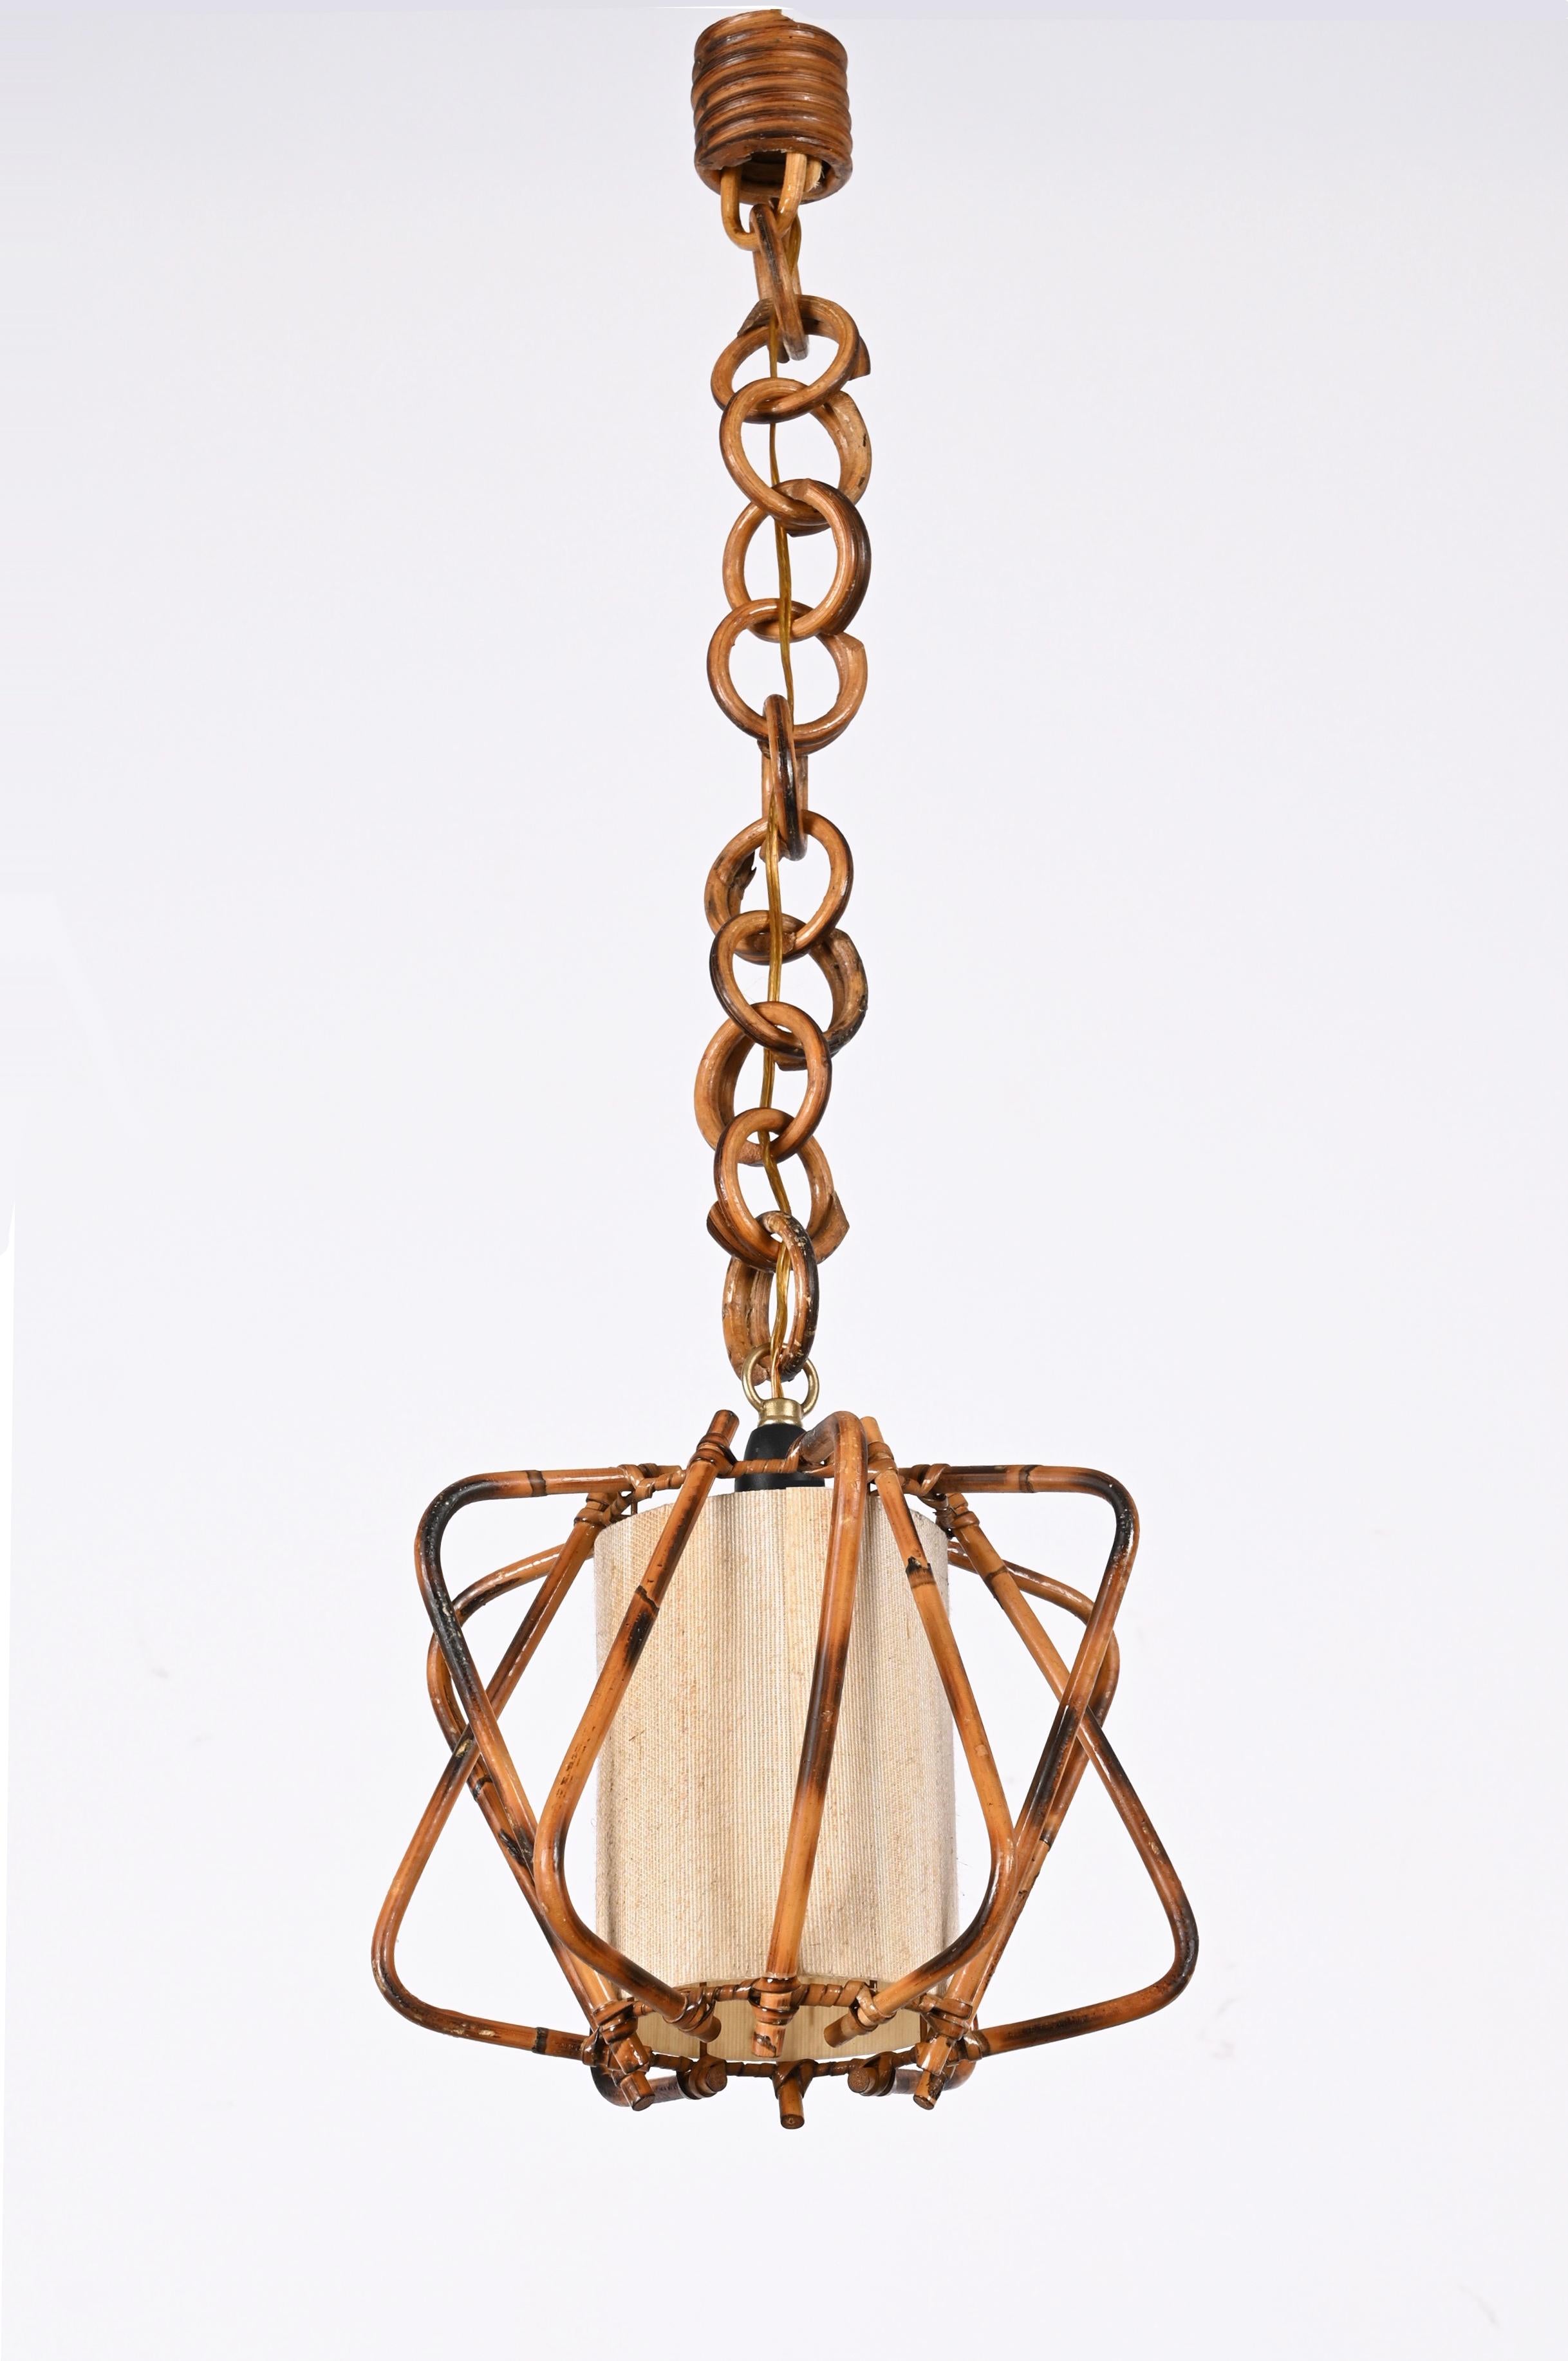 Midcentury Bamboo, Cane and Rattan French Chandelier After Louis Sognot, 1960s For Sale 13